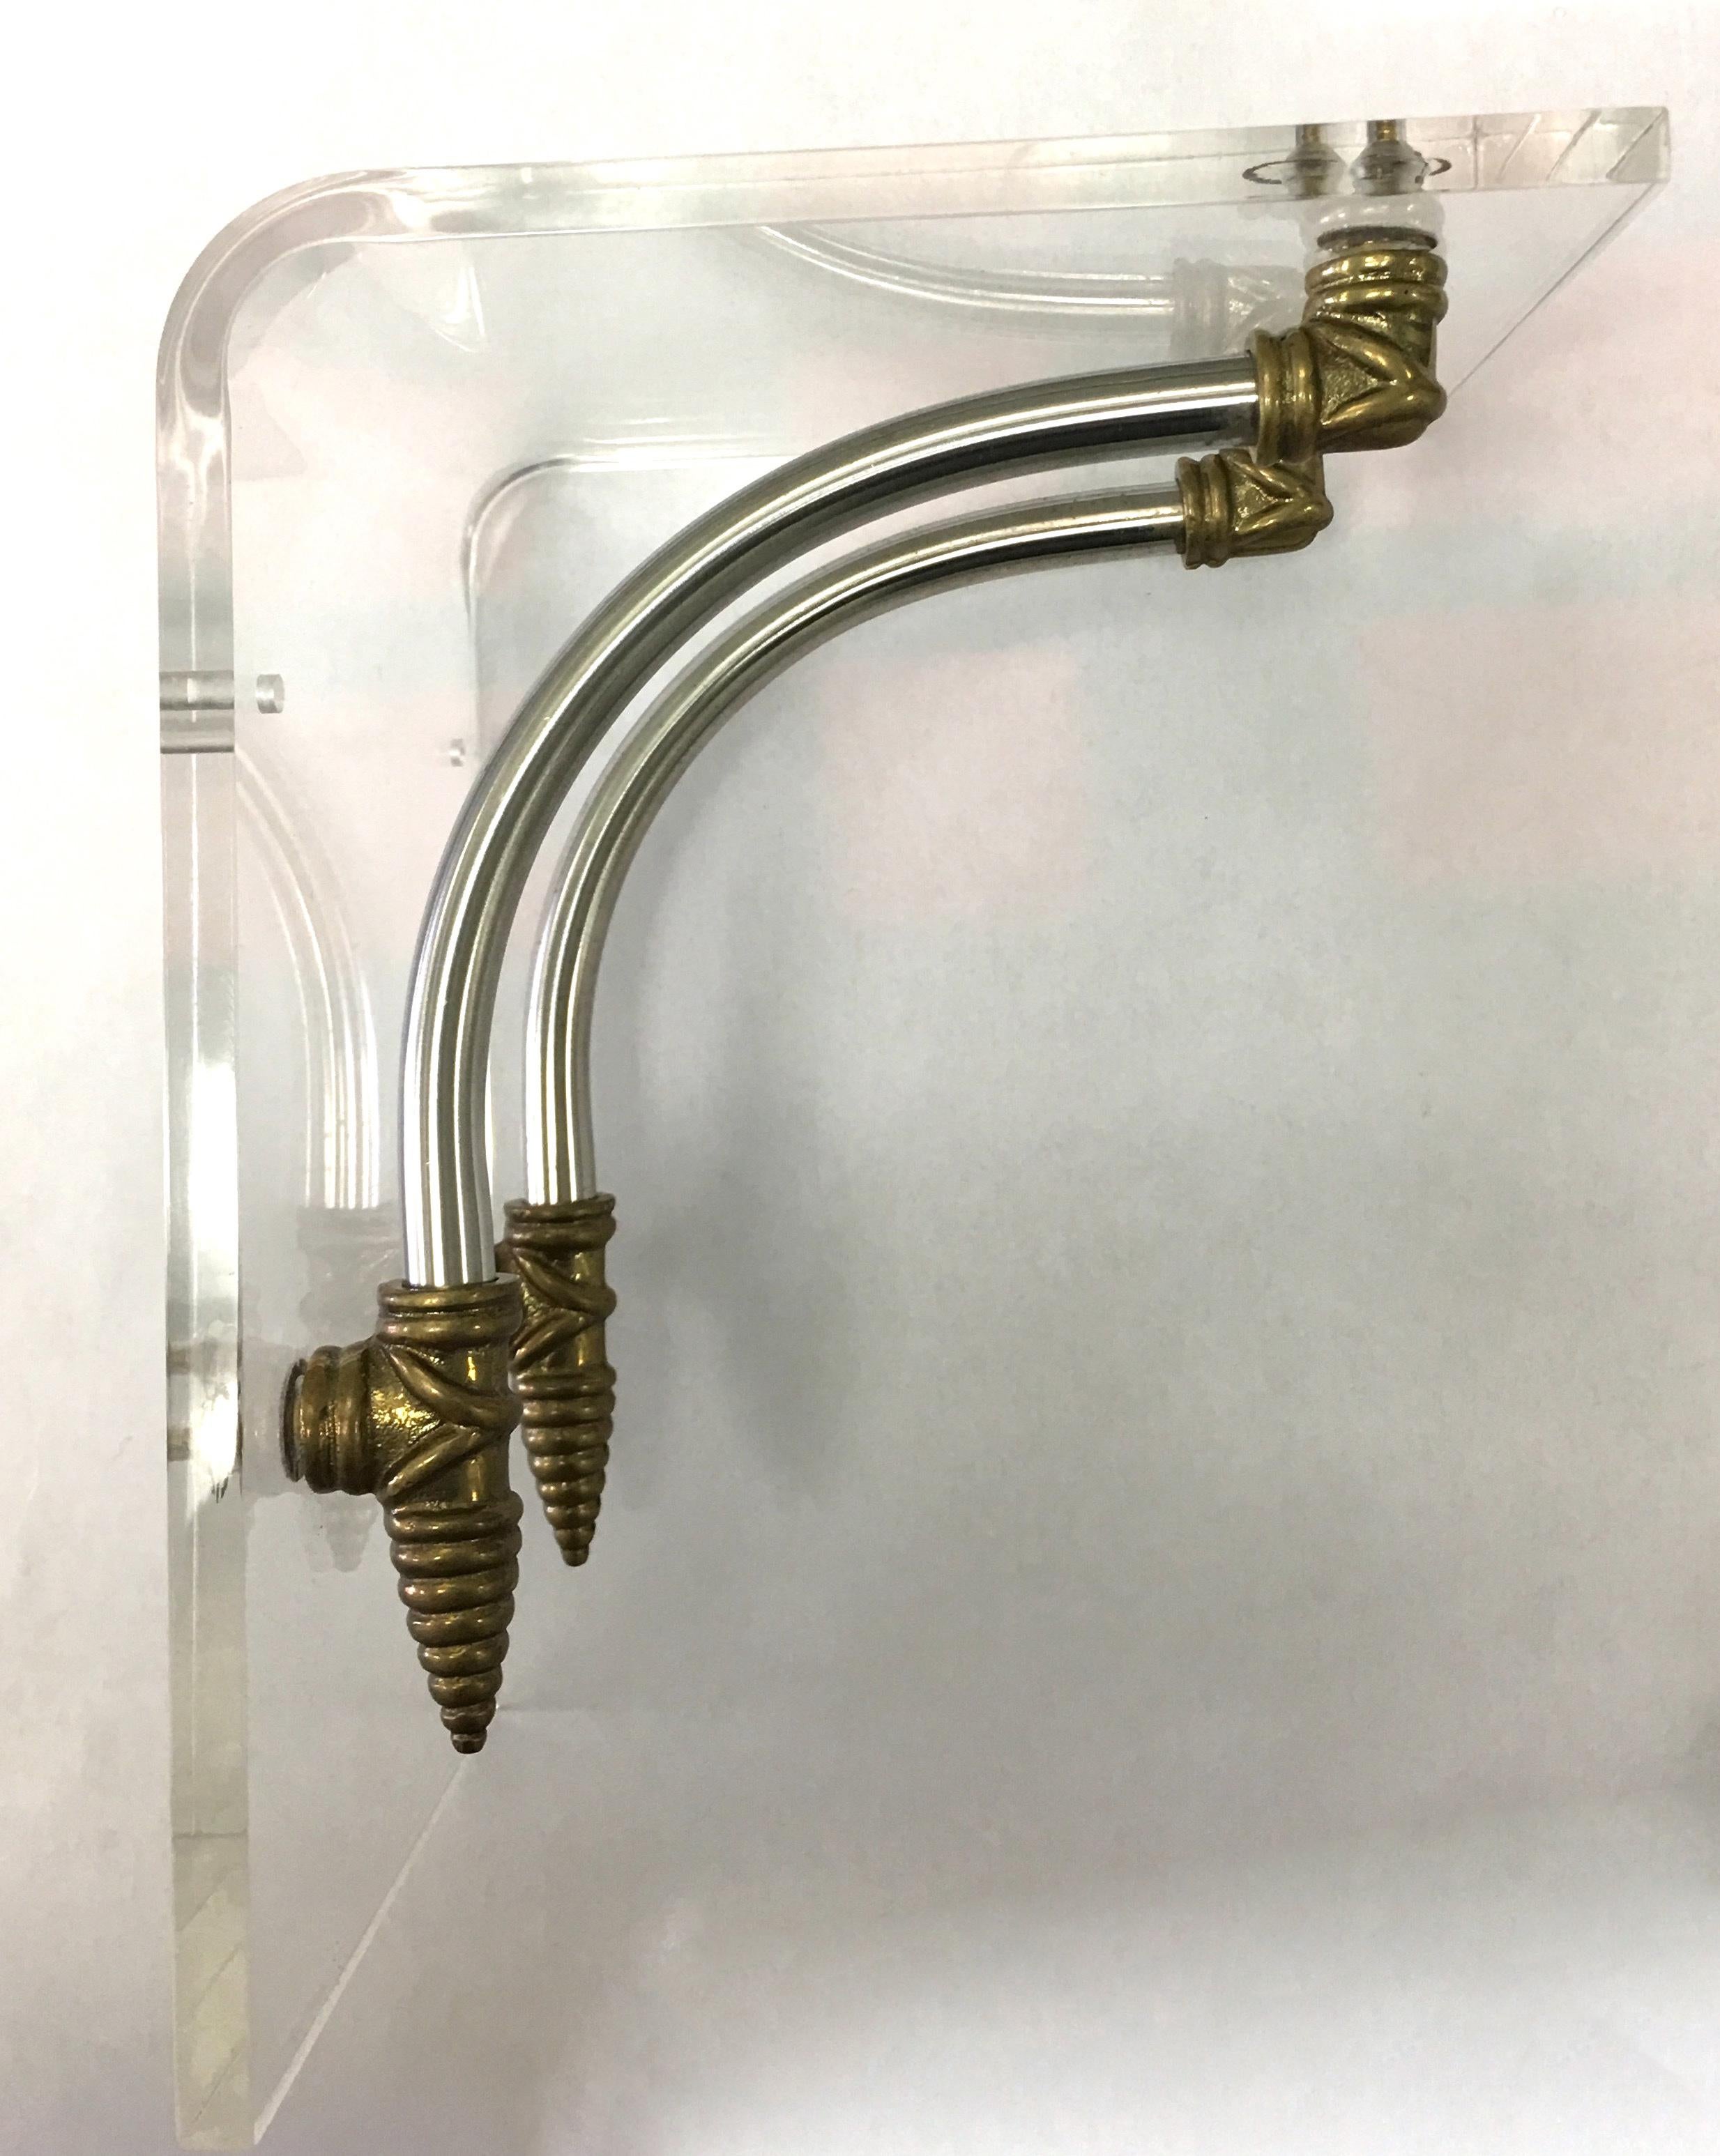 Pair of 1970s Hollywood Regency Lucite and brass wall brackets. Two pre drilled holes on the back. Priced per pair. Two pairs available.